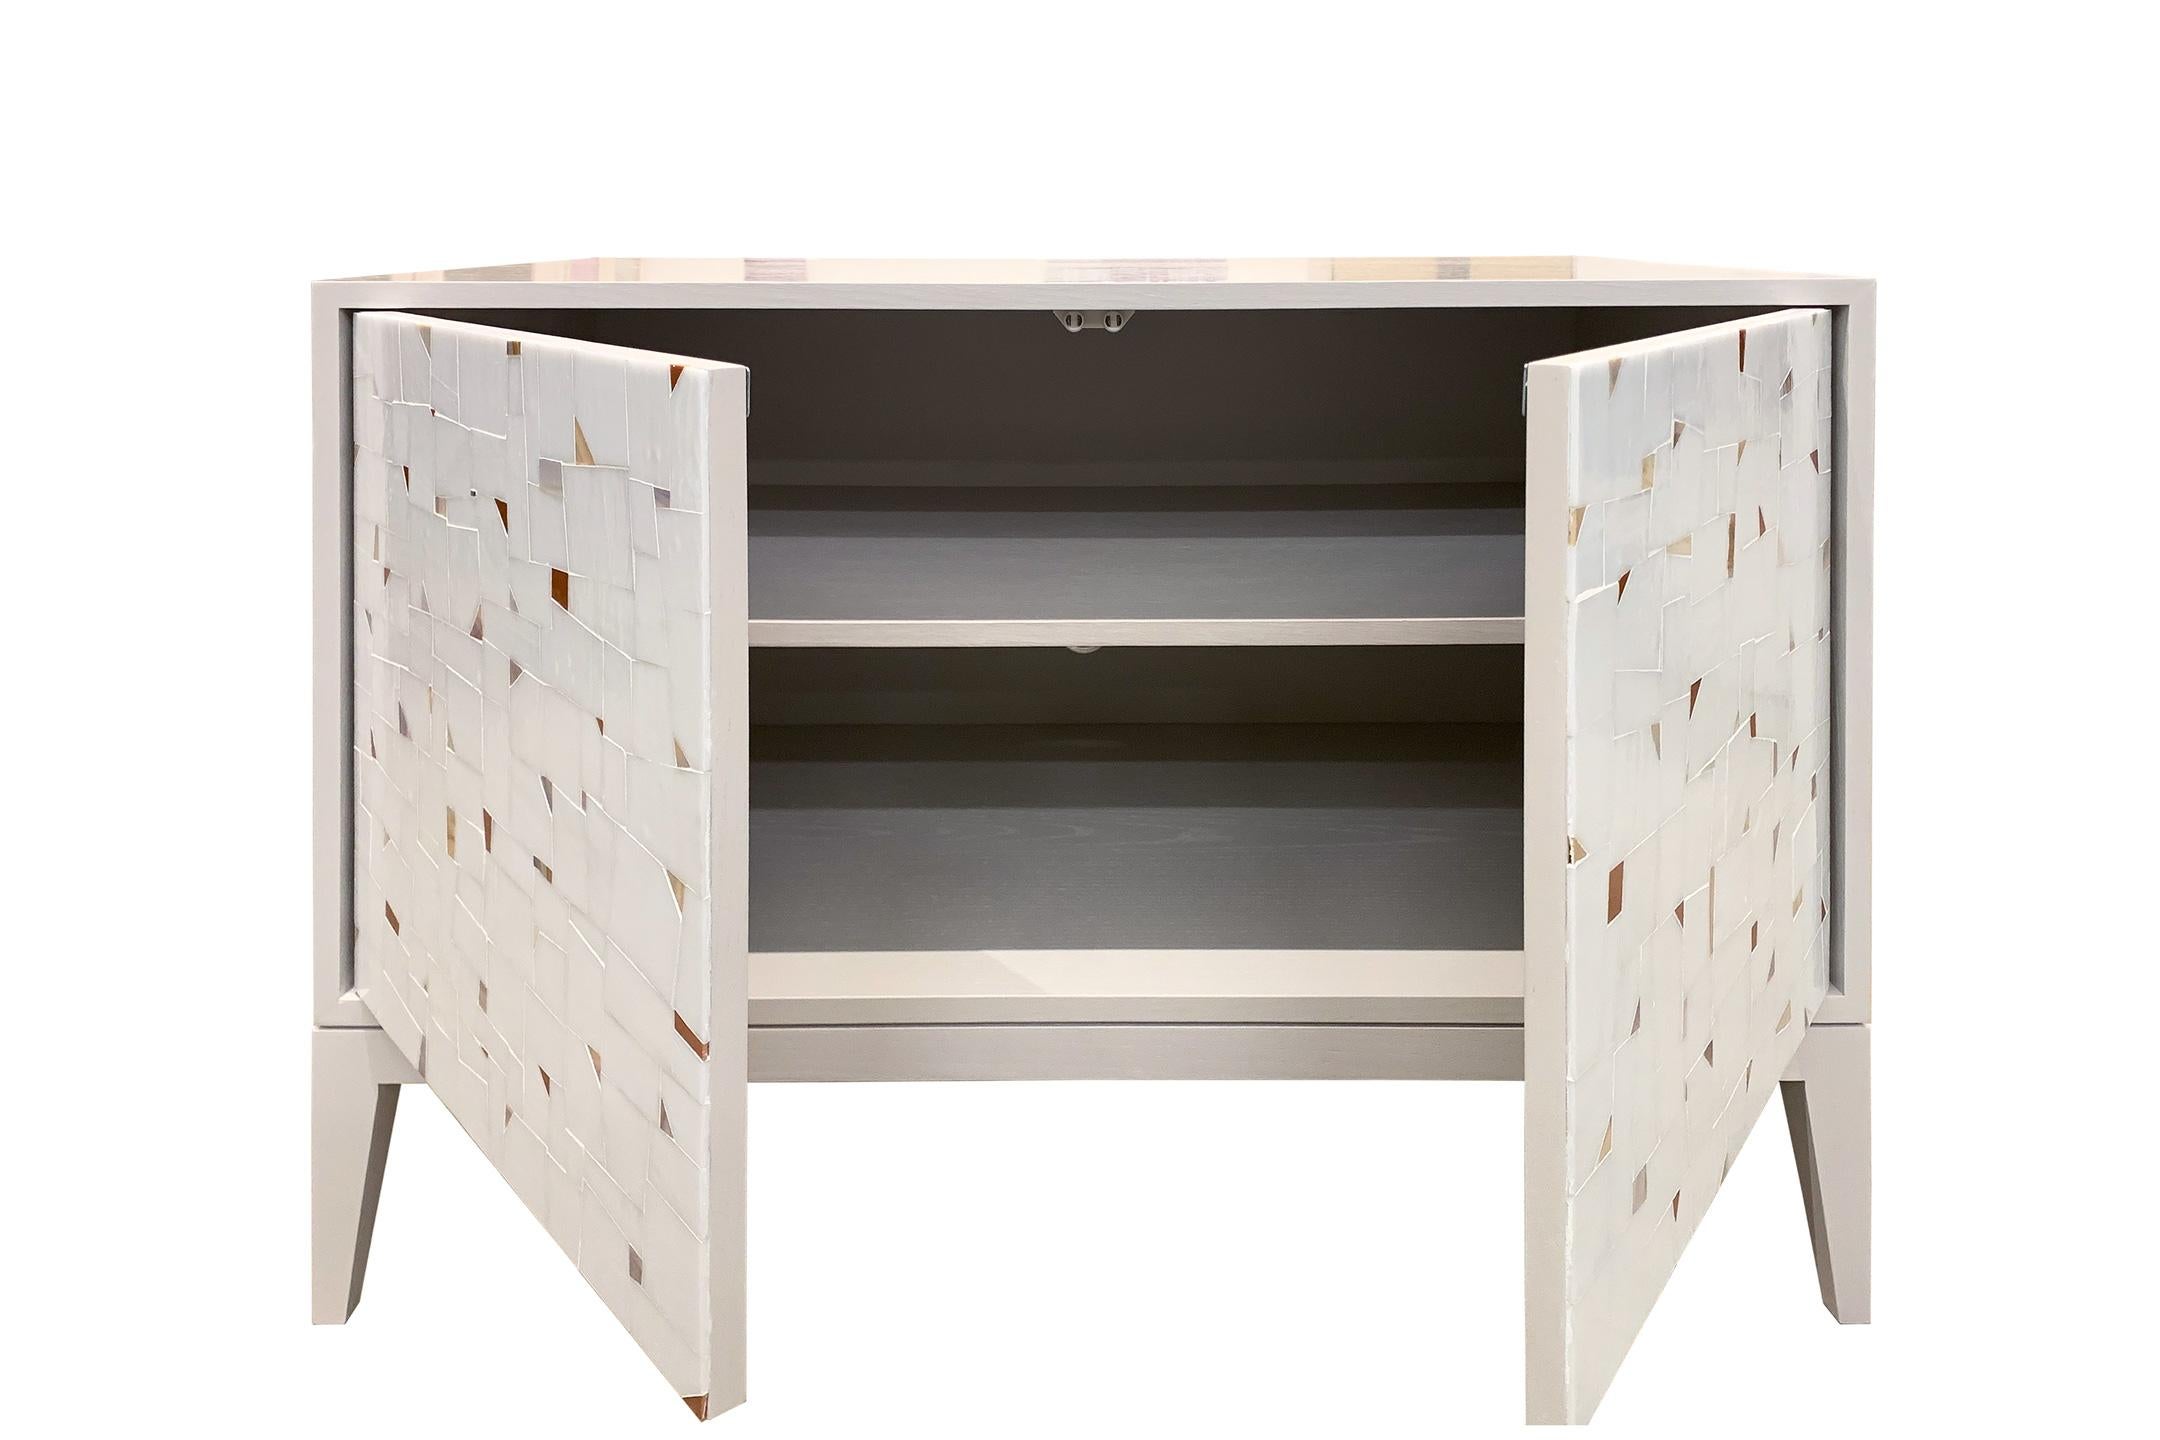 The platform buffet by Ercole Home has a 2-door front, with a Misty gray finish on oak. Handcut glass mosaics in Icy white and brown mix glass mosaic decorate the surface in a continuous Terrazzo pattern.
There is one adjustable interior shelf in